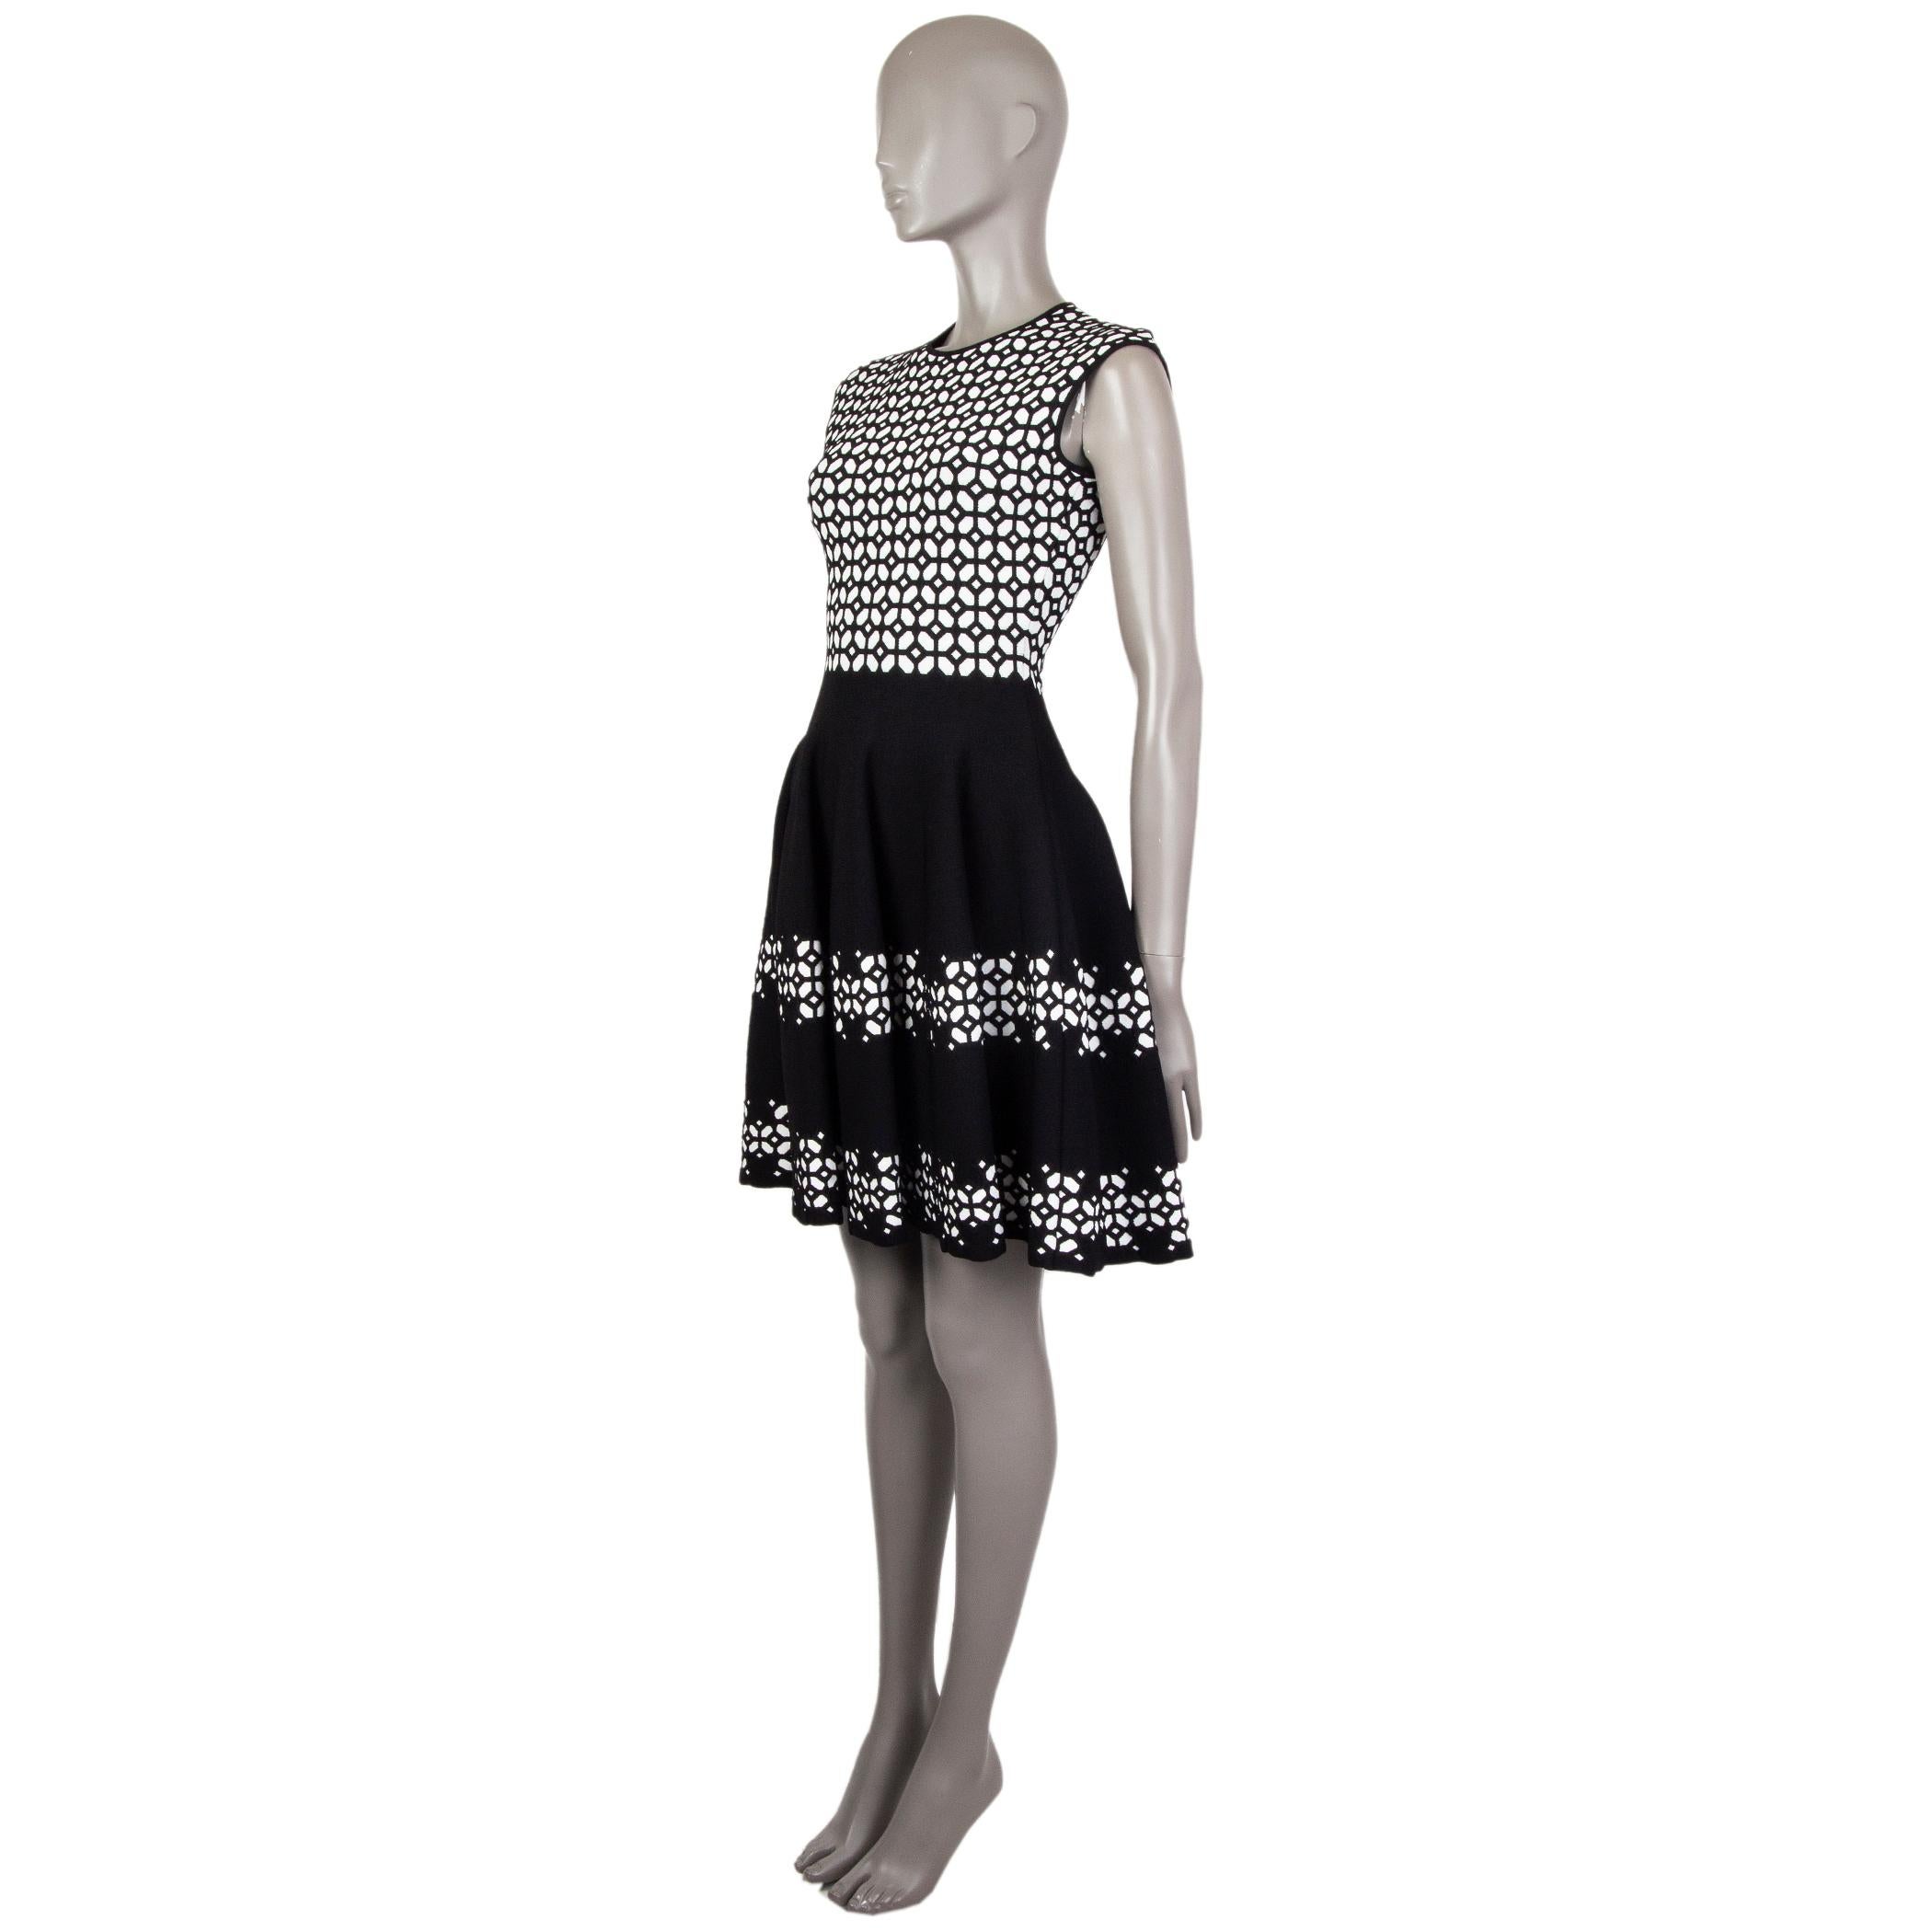 Alexander McQueen sleeveless, jacquard-knit flared dress in black and white viscose blend (assumed as tag is missing). With round neck. Unlined. Has been worn and in excellent condition.

Tag Size Missing Size
Size S
Shoulder Width 45cm